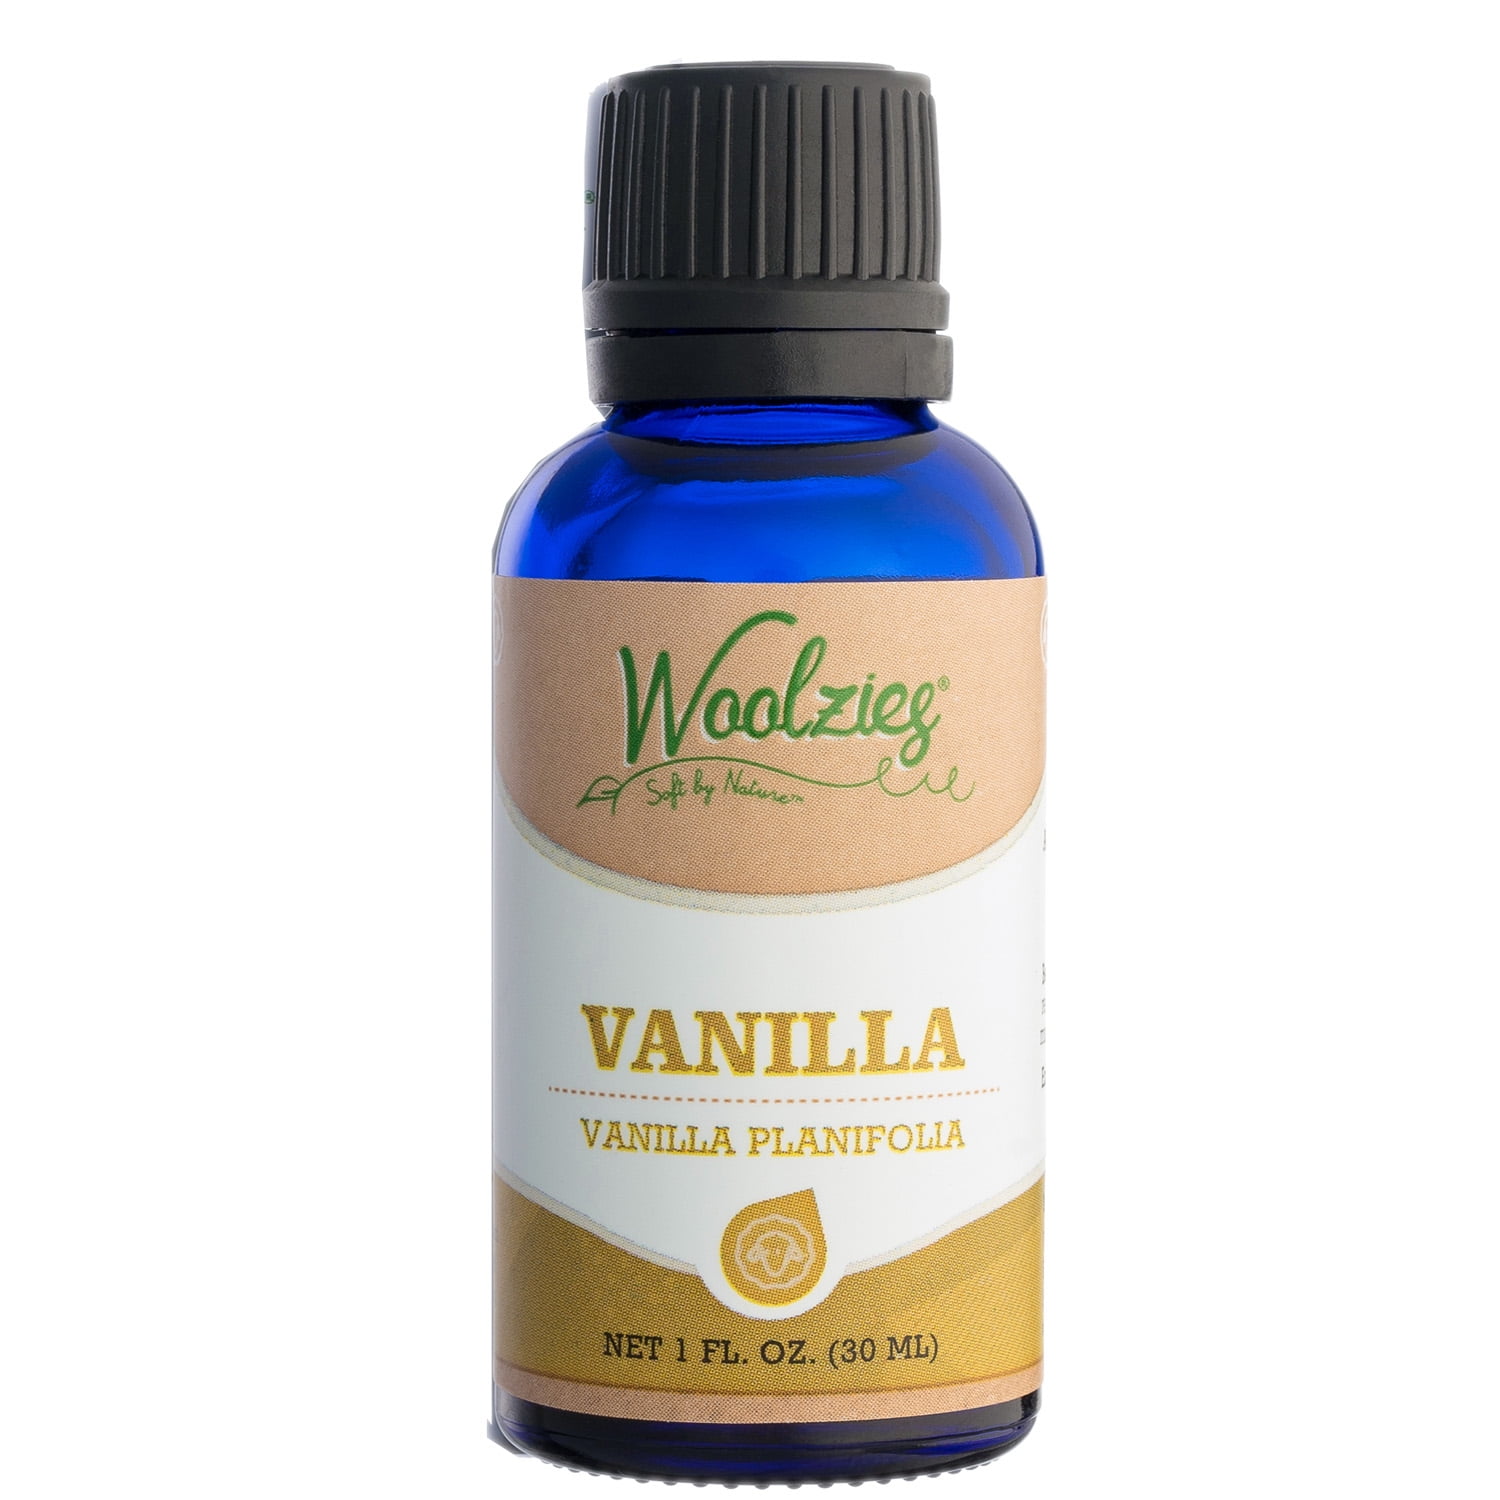 Woolzies Vanilla Essential Oil - Aromatherapy Oil for Diffuser, Home &  Topical Use | 100% Pure Natural Blend of Vanilla Oil | Therapeutic Grade